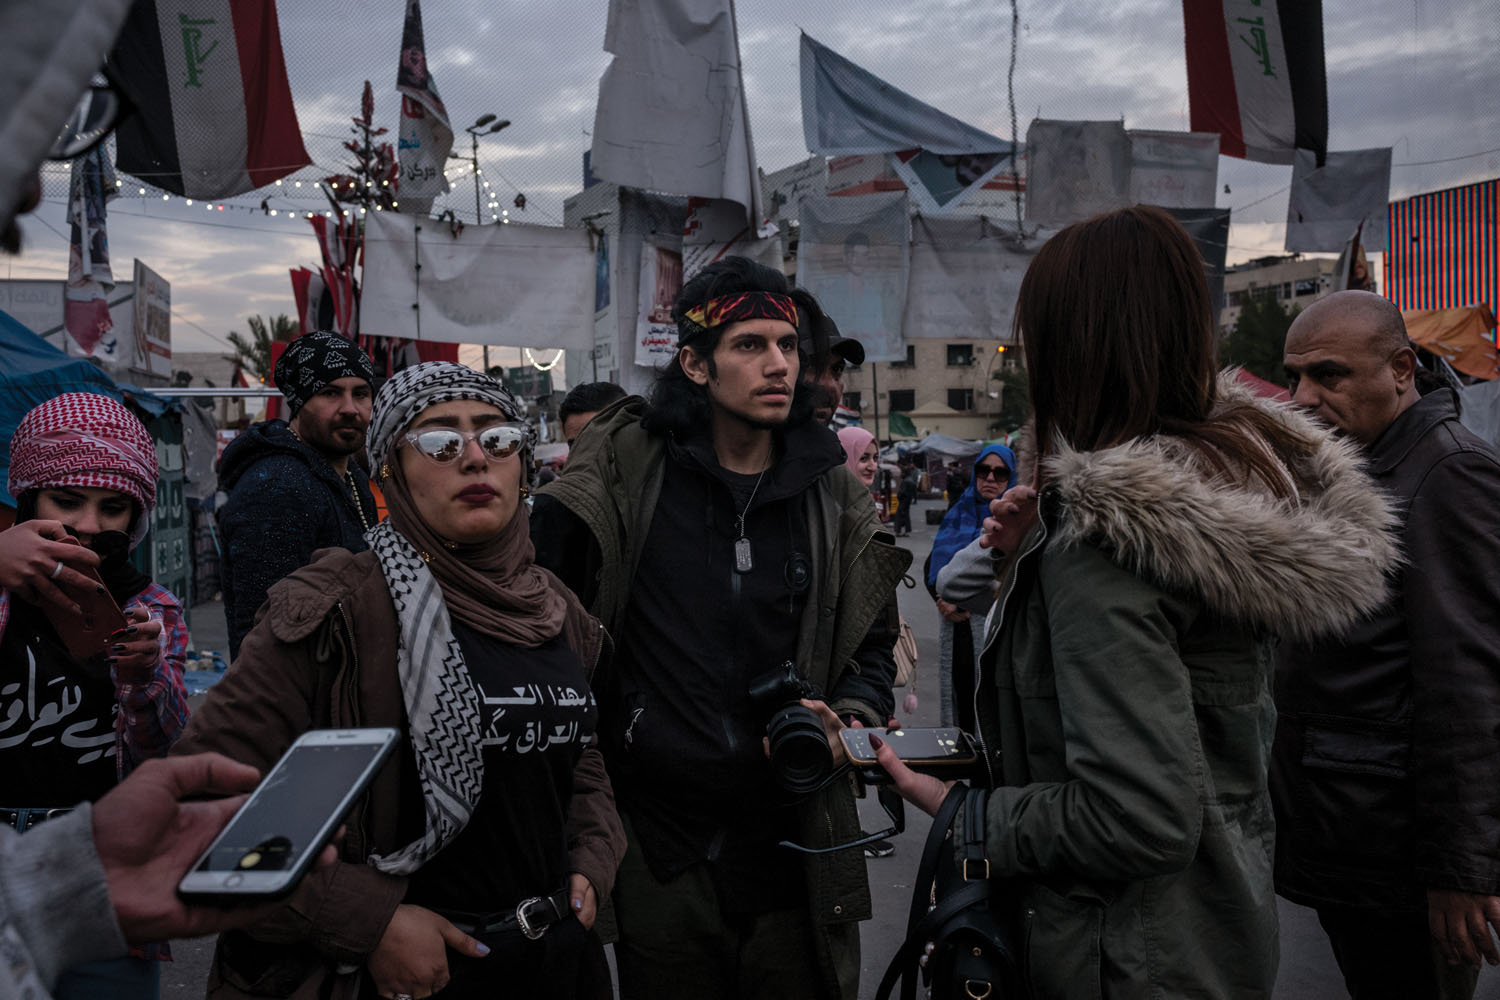 Filmmaker Mohamed Khalili (center), 22, and protester Asraa al Tai (left) scout locations for a short film documenting women’s support for the Tishreen Revolution.